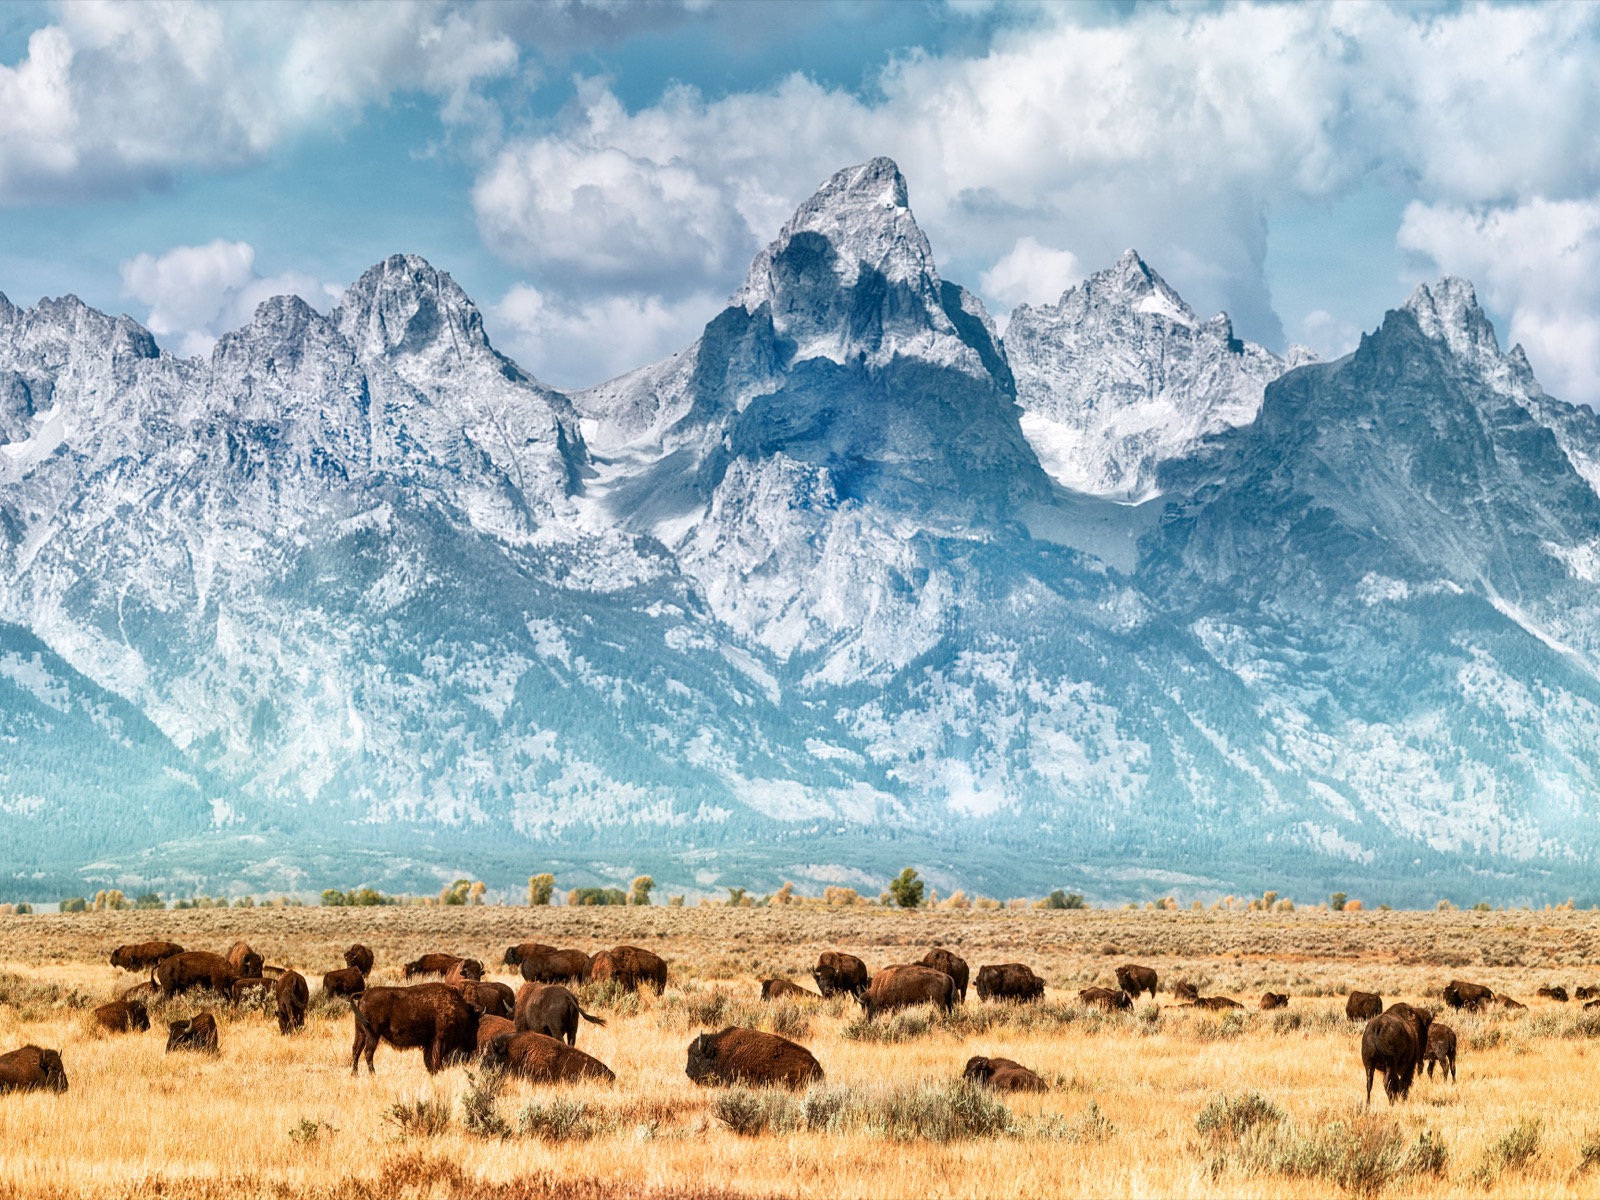 Can You Match These Natural Wonders to Their Locations? Grand Teton Mountains, Wyoming